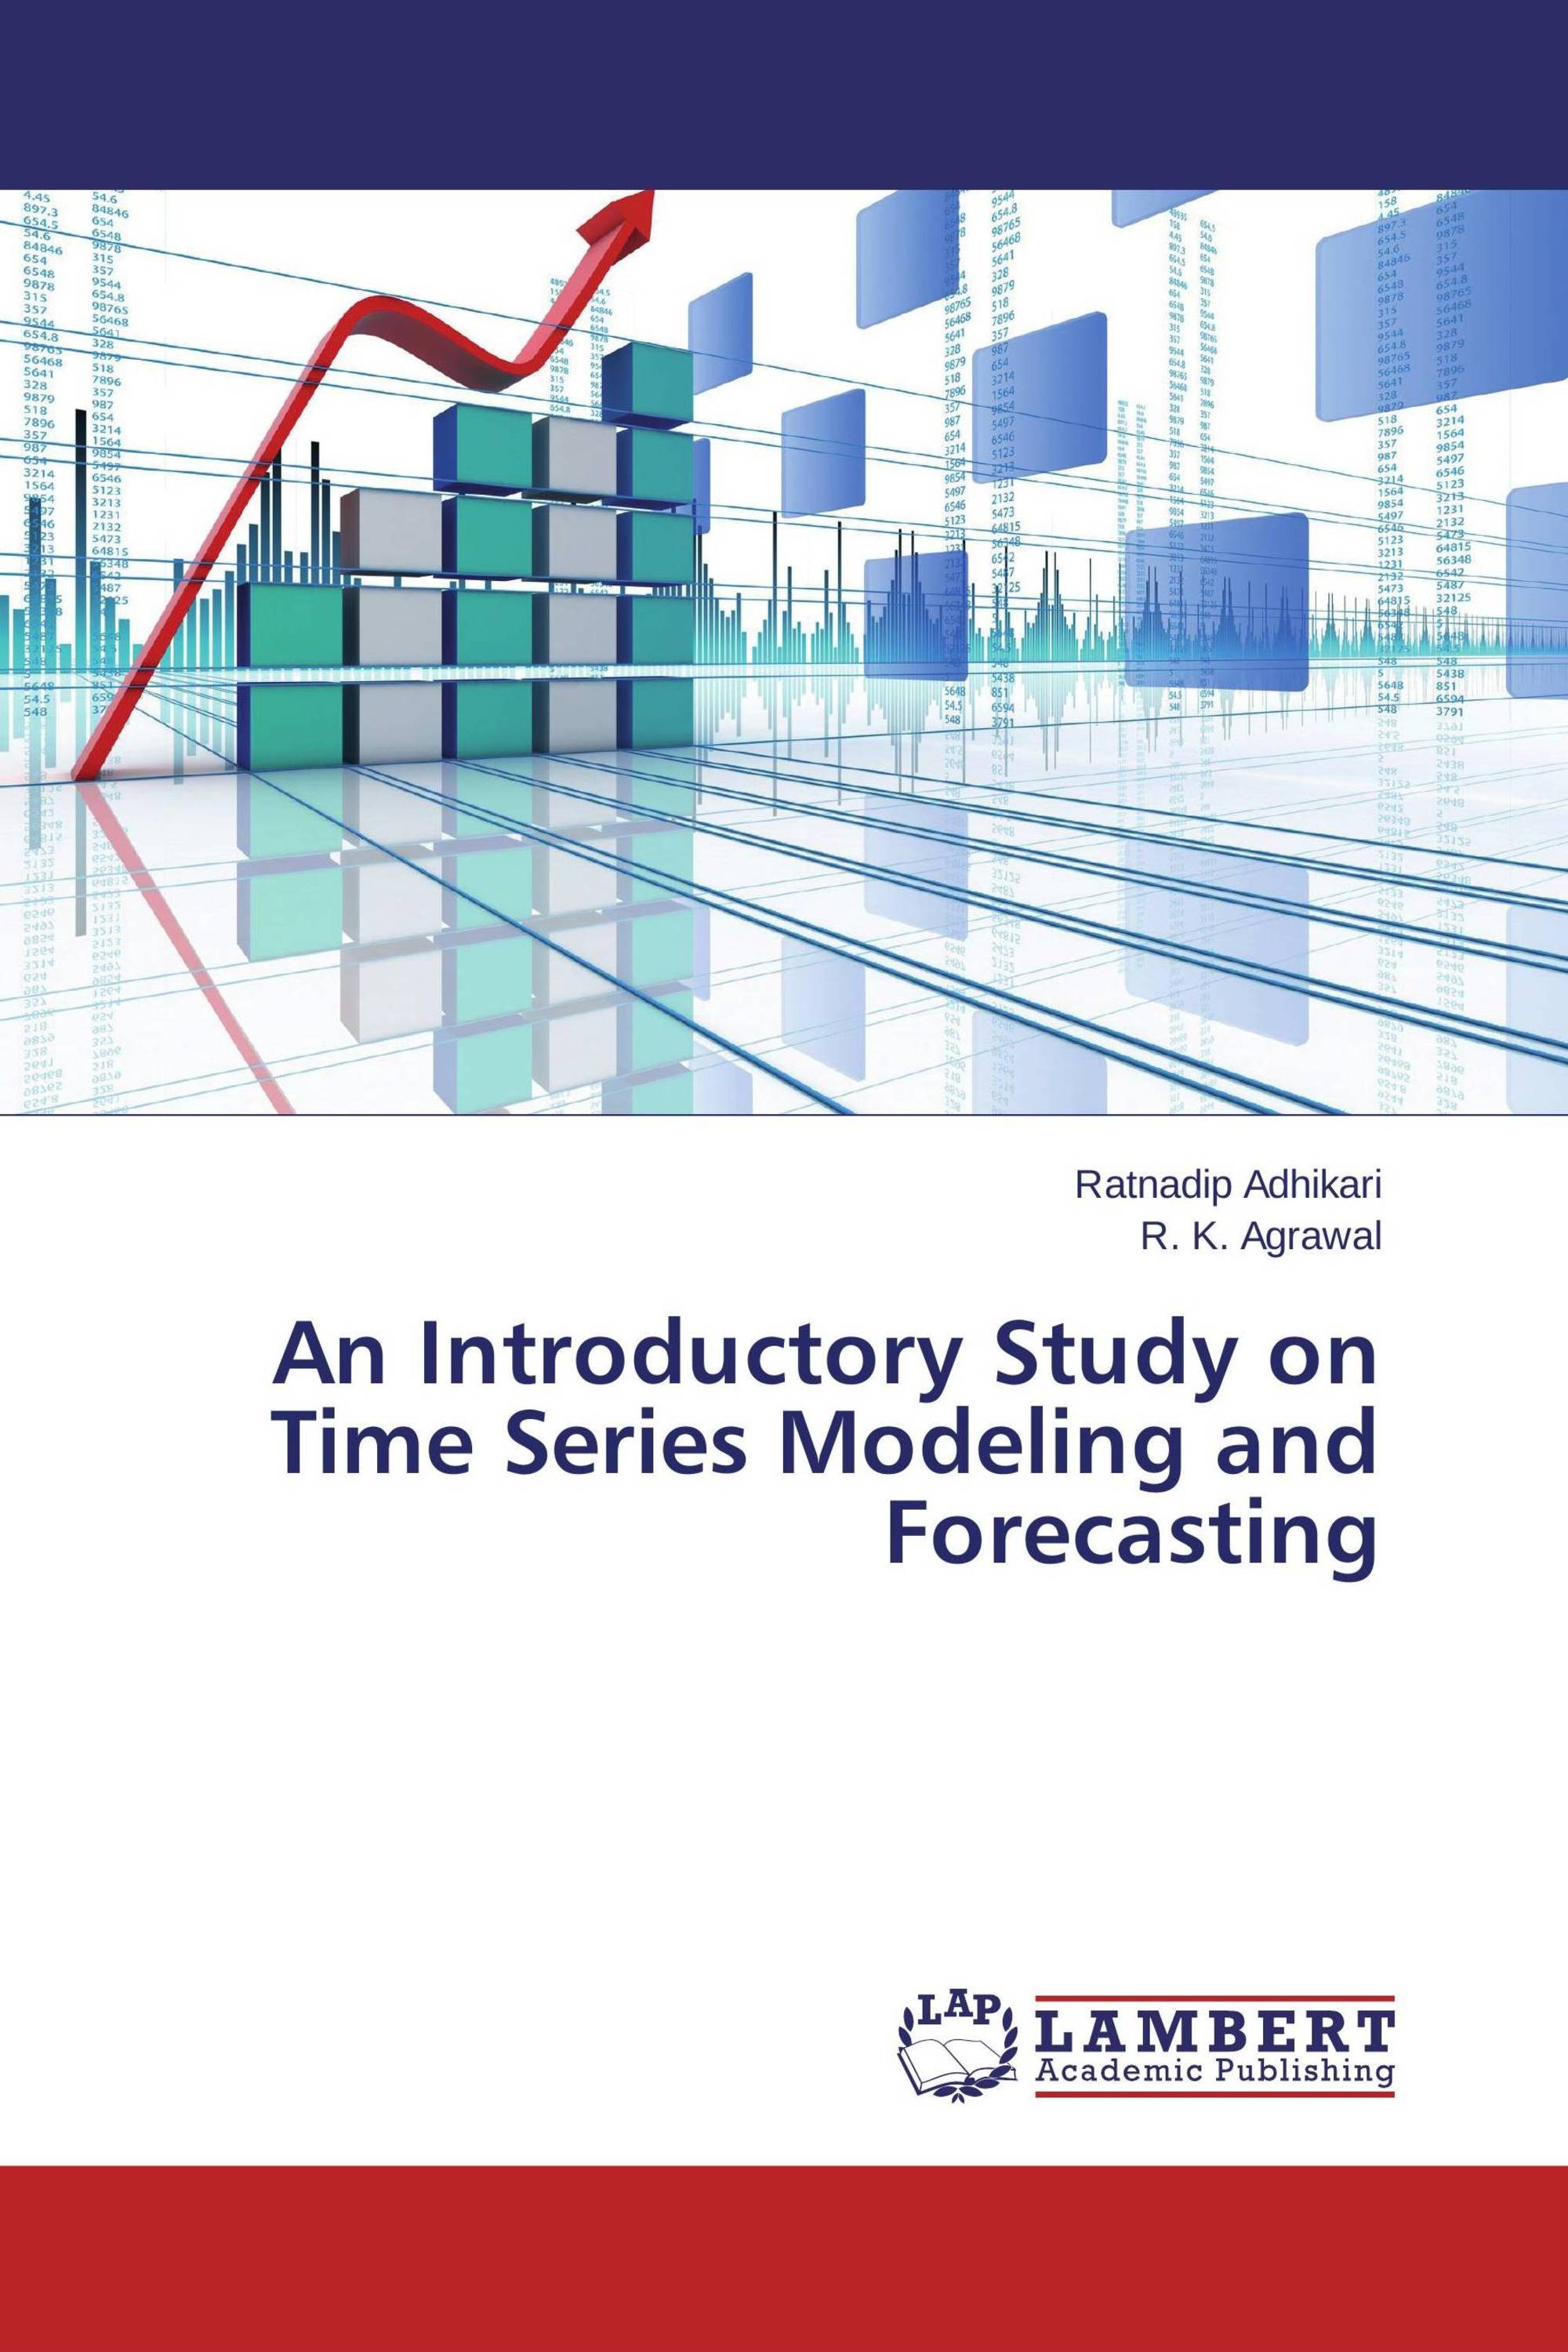 case study on time series